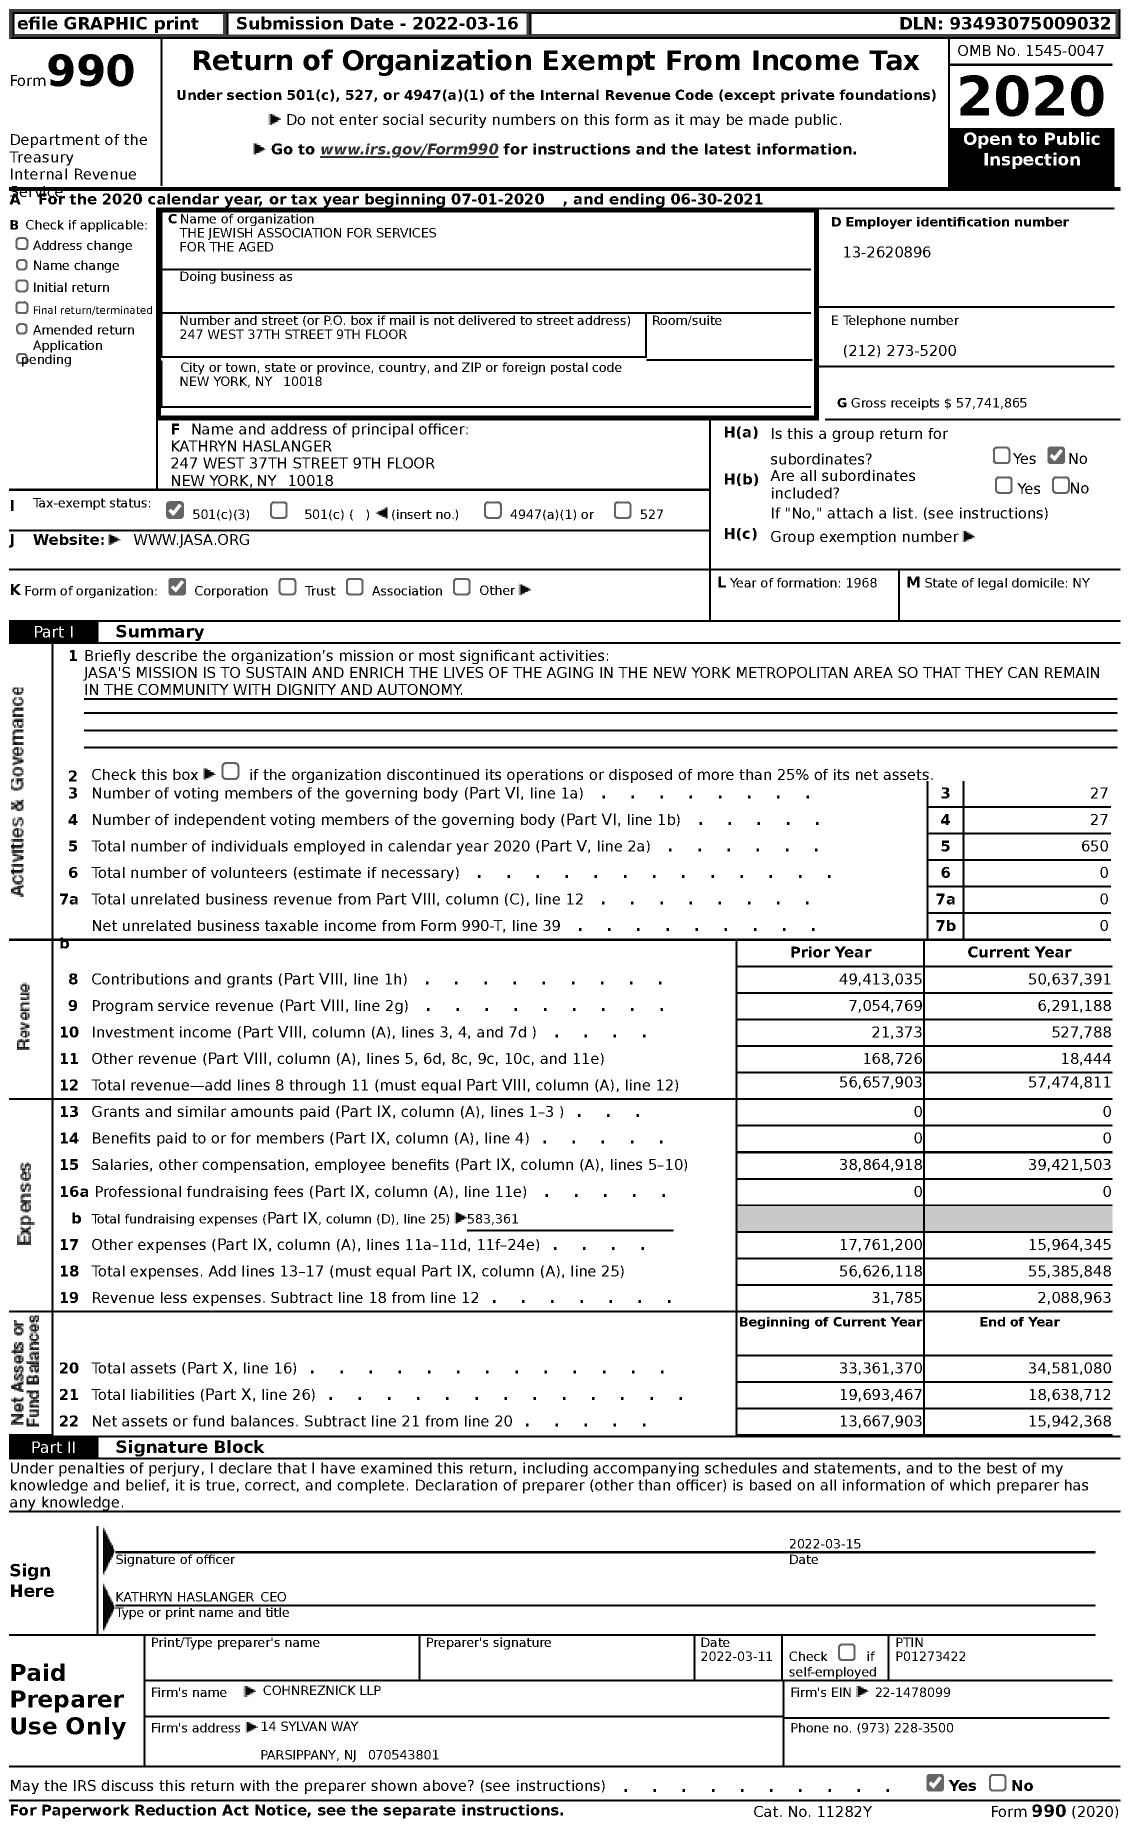 Image of first page of 2020 Form 990 for The Jewish Association for Services for the Aged